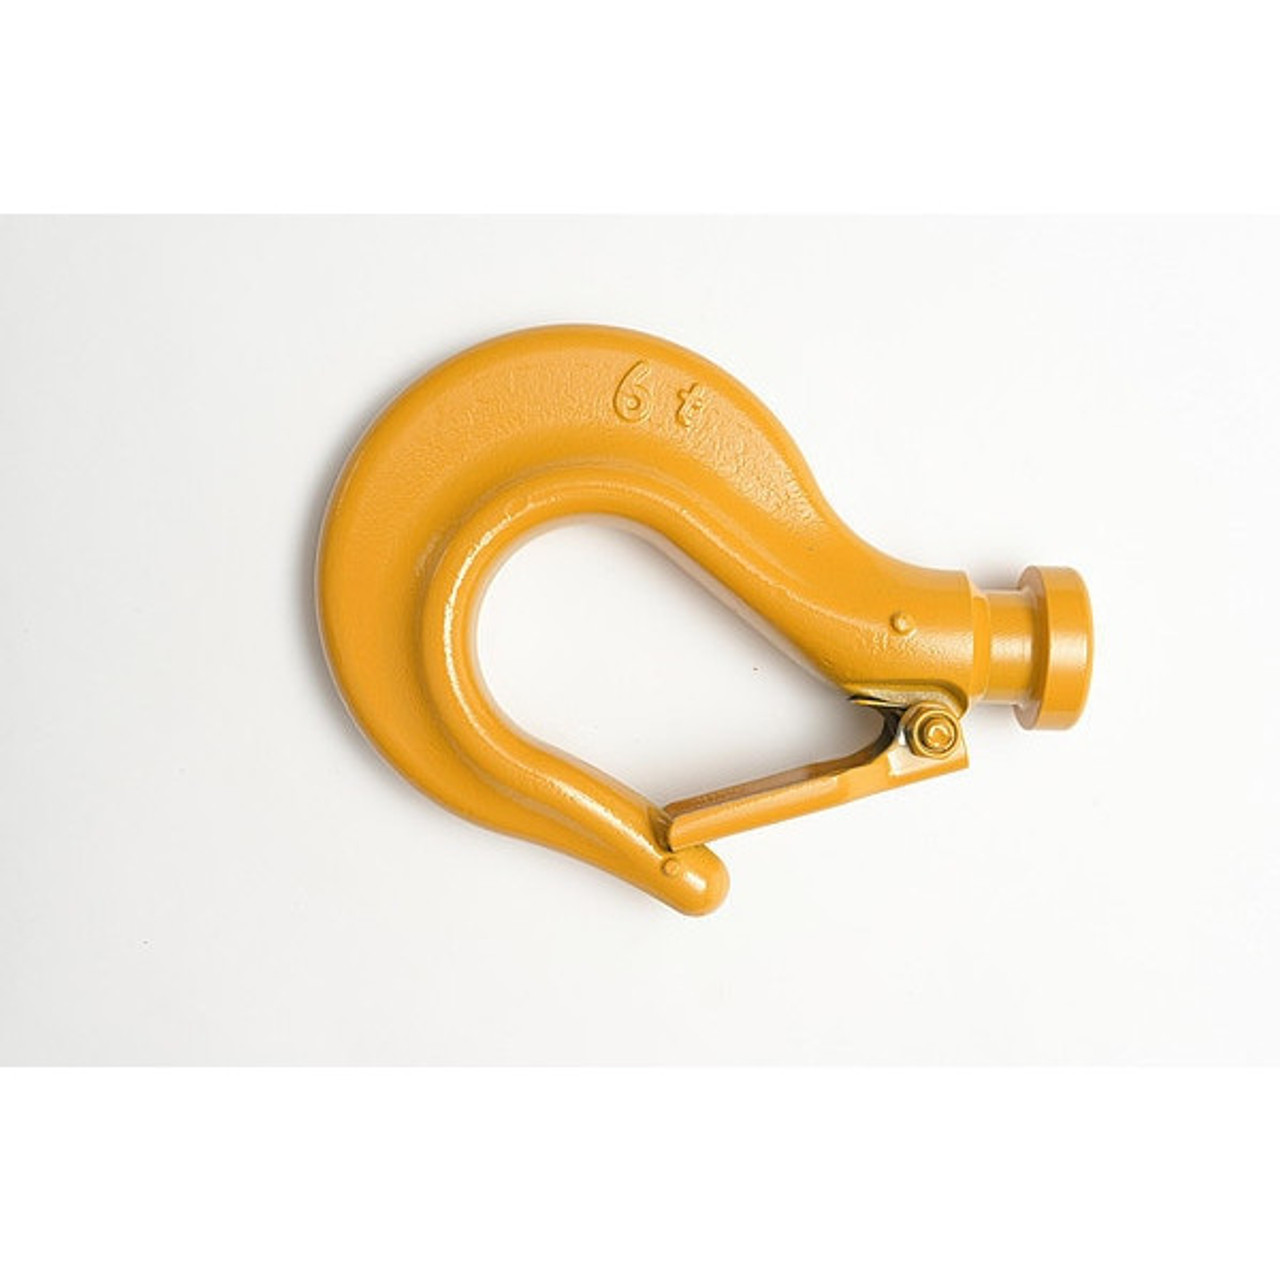 Bottom Hook Assembly, Product Type Bottom Hook Assembly, Compatible Hoist Type Lever Chain Hoists, Compatible Load Capacity 12,000 lb, Compatible Series L5LB, Material Steel Alloy, Overall Length Not Applicable, Overall Width 6.2 in, Overall Height Not Applicable, Includes Safety Latch